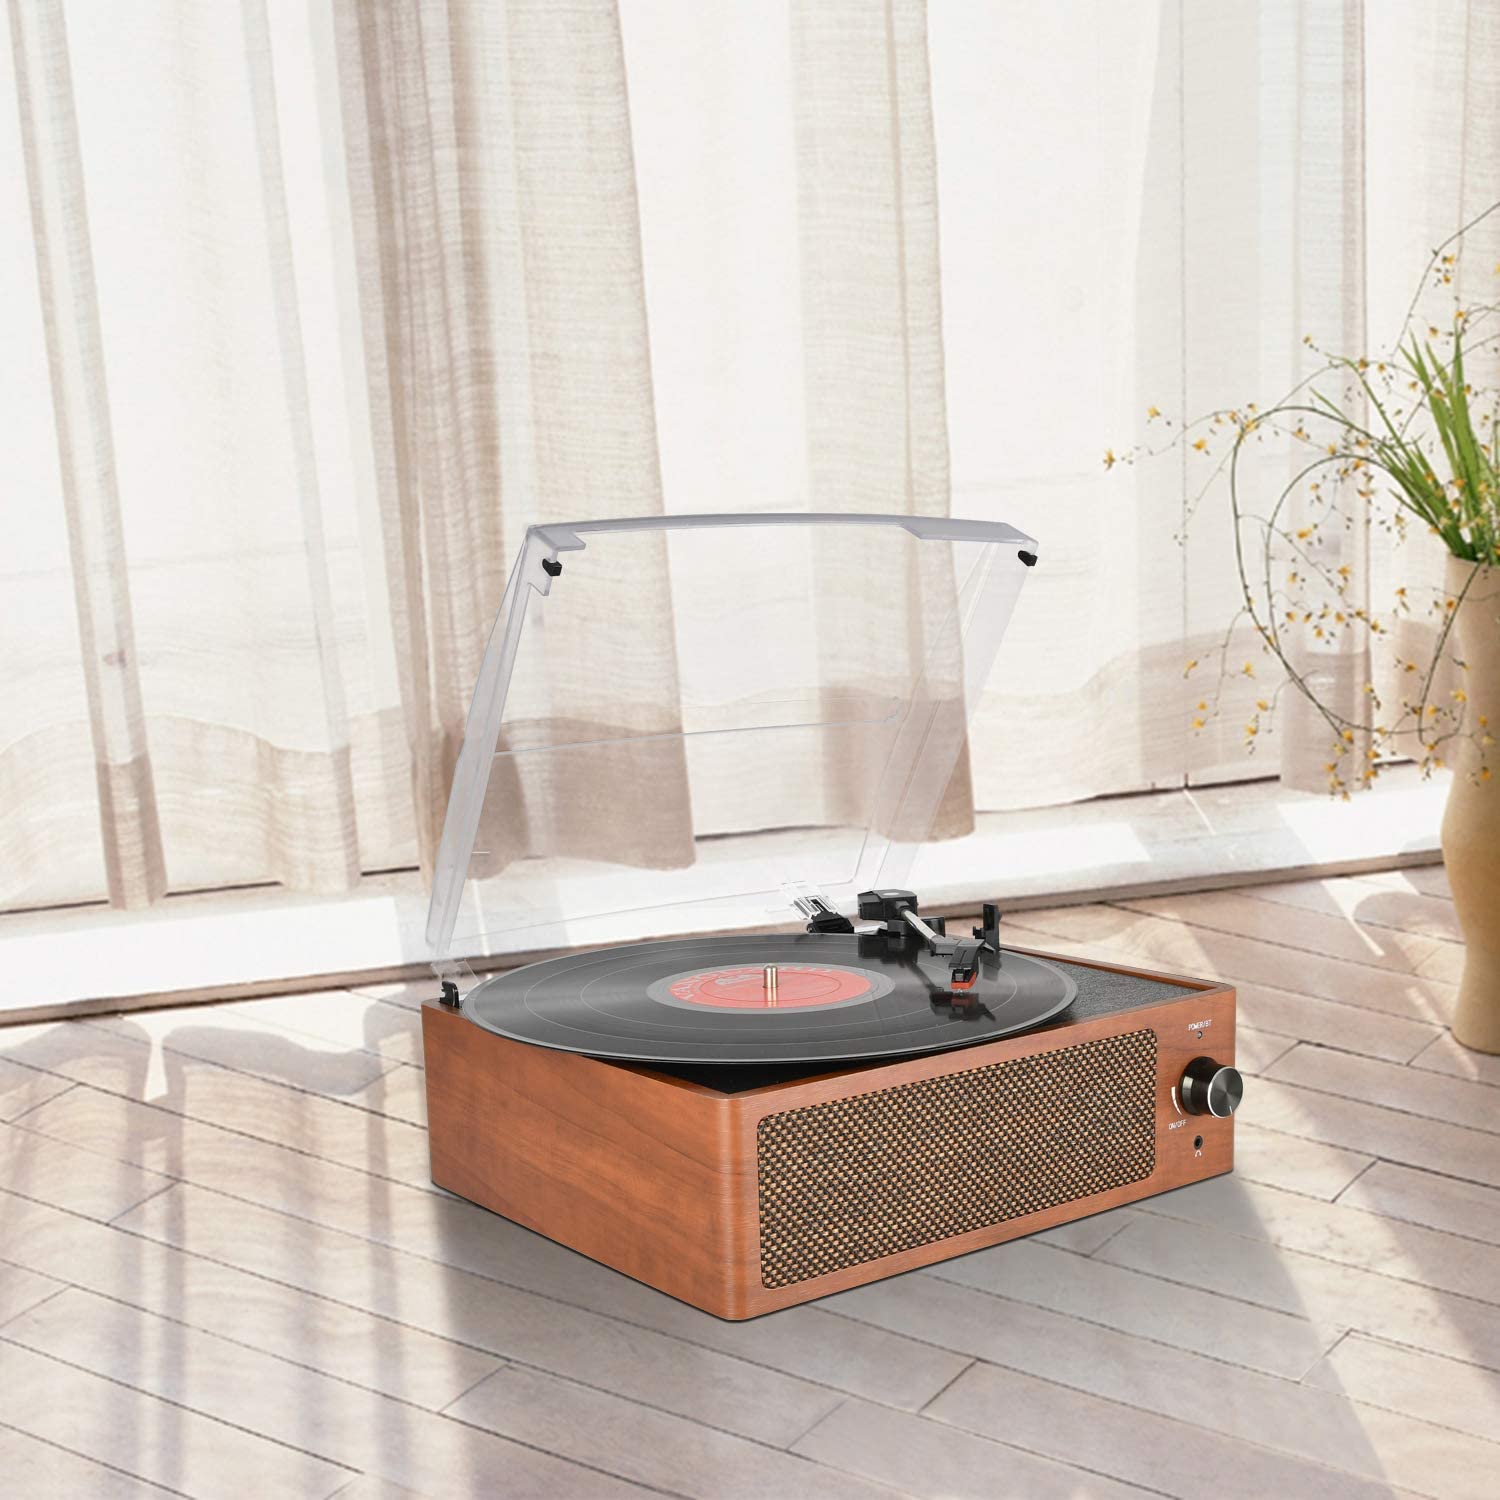 DIGITNOW Bluetooth Record Player Belt-Driven 3-Speed Turntable, Vintage Vinyl Record Players Built-in Stereo Speakers, with Headphone Jack/ Aux Input/ RCA Line Out, Wooden